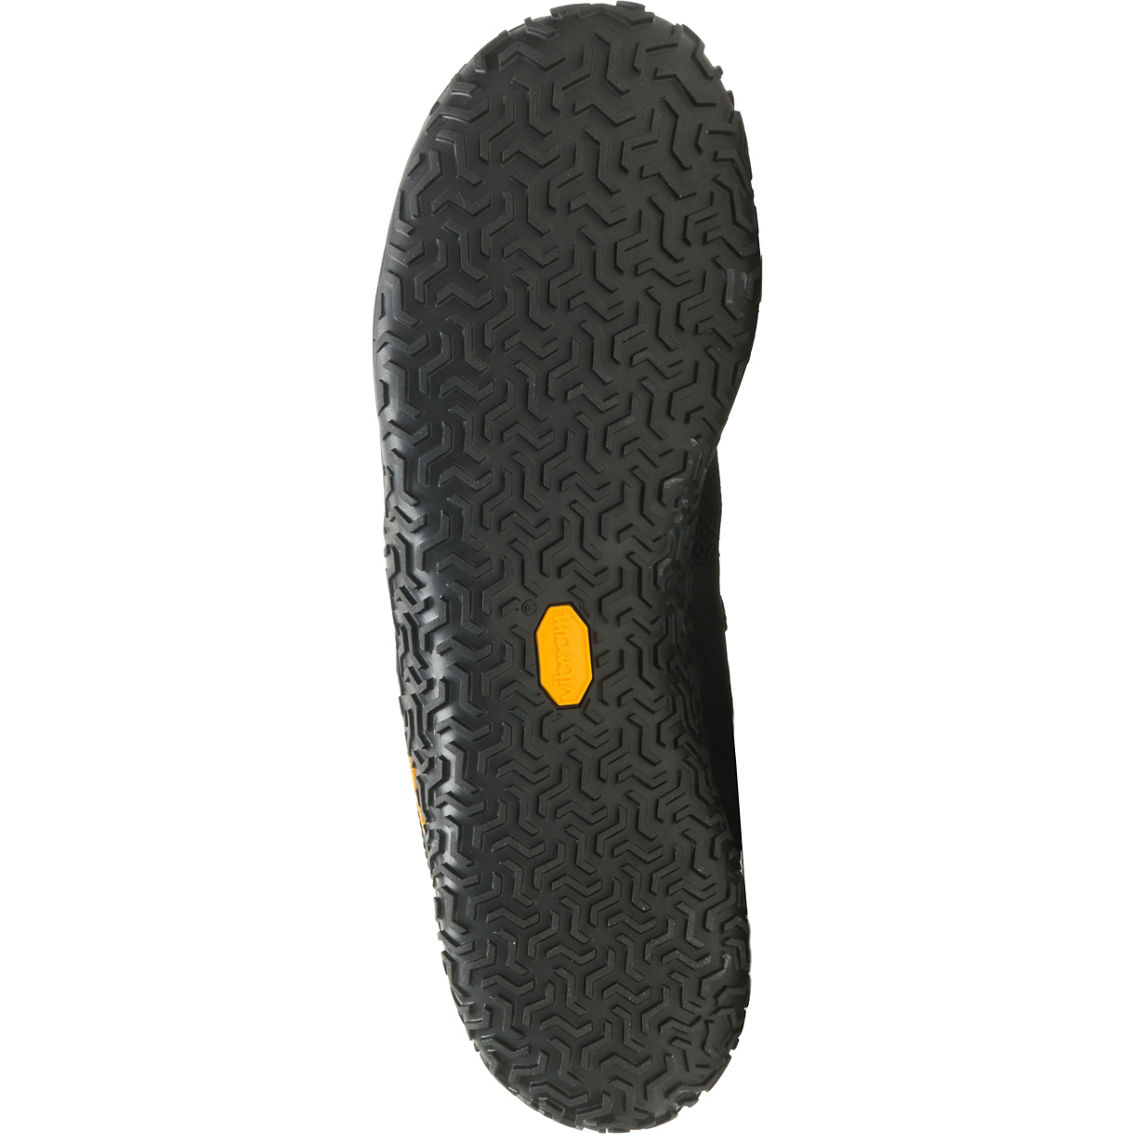 Merrell Men's Trail Glove 7 Shoes - Image 6 of 6